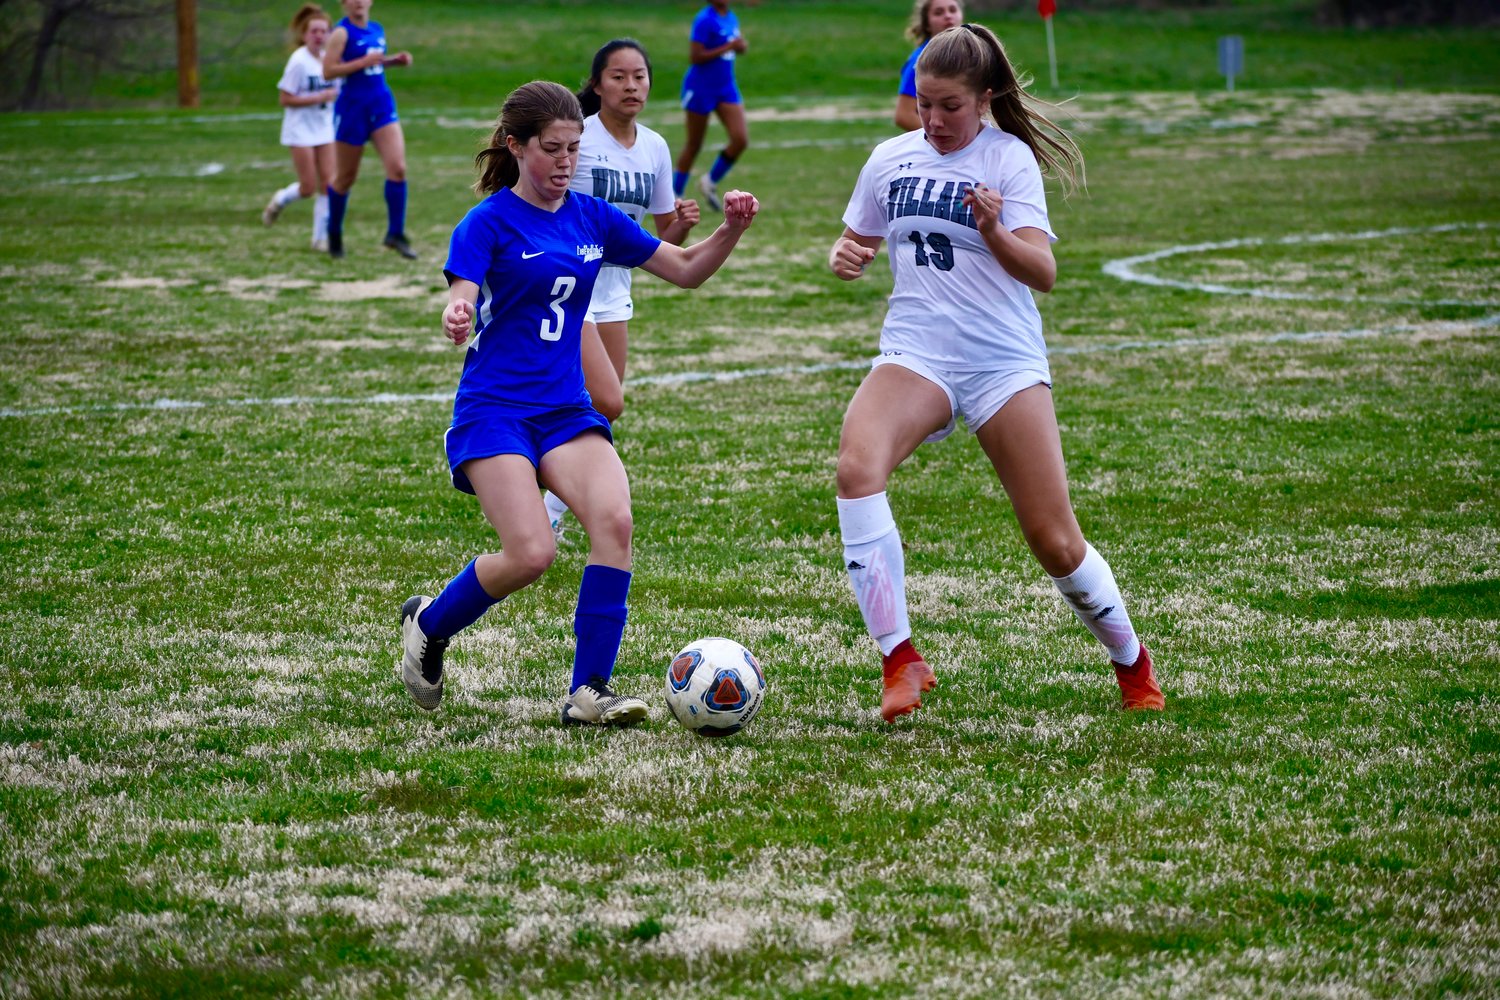 Mady Niven looks to get by the opposing pressure.